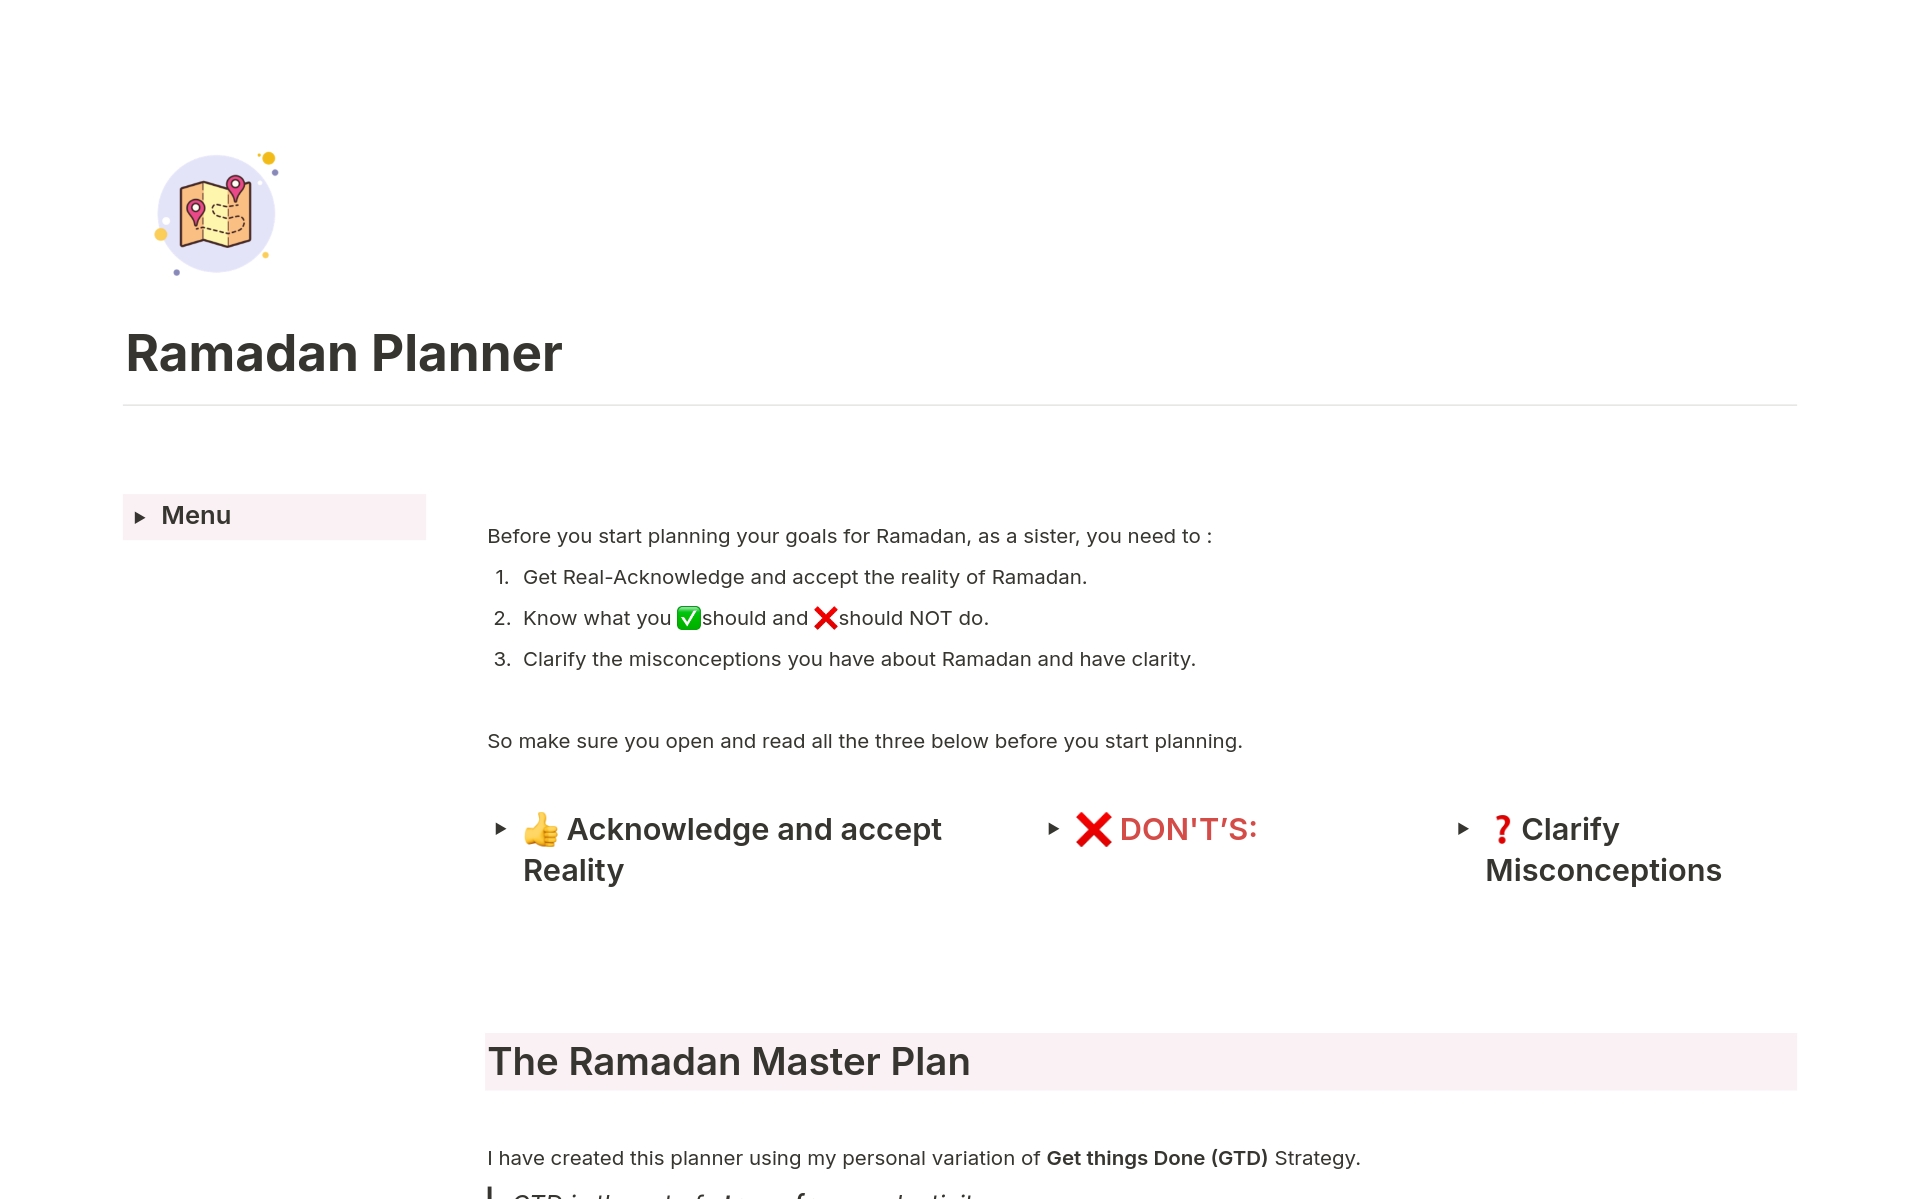 Introducing the 🌙 Ramadan Planner+Tracker 2024, a Notion template that will help you finish the Ramadan with

😌Peace
🤩Clarity
✅Ramadan goals DONE

It’s $79 but I am giving first 50 copies for FREE 💝

🚨 Limited copies only